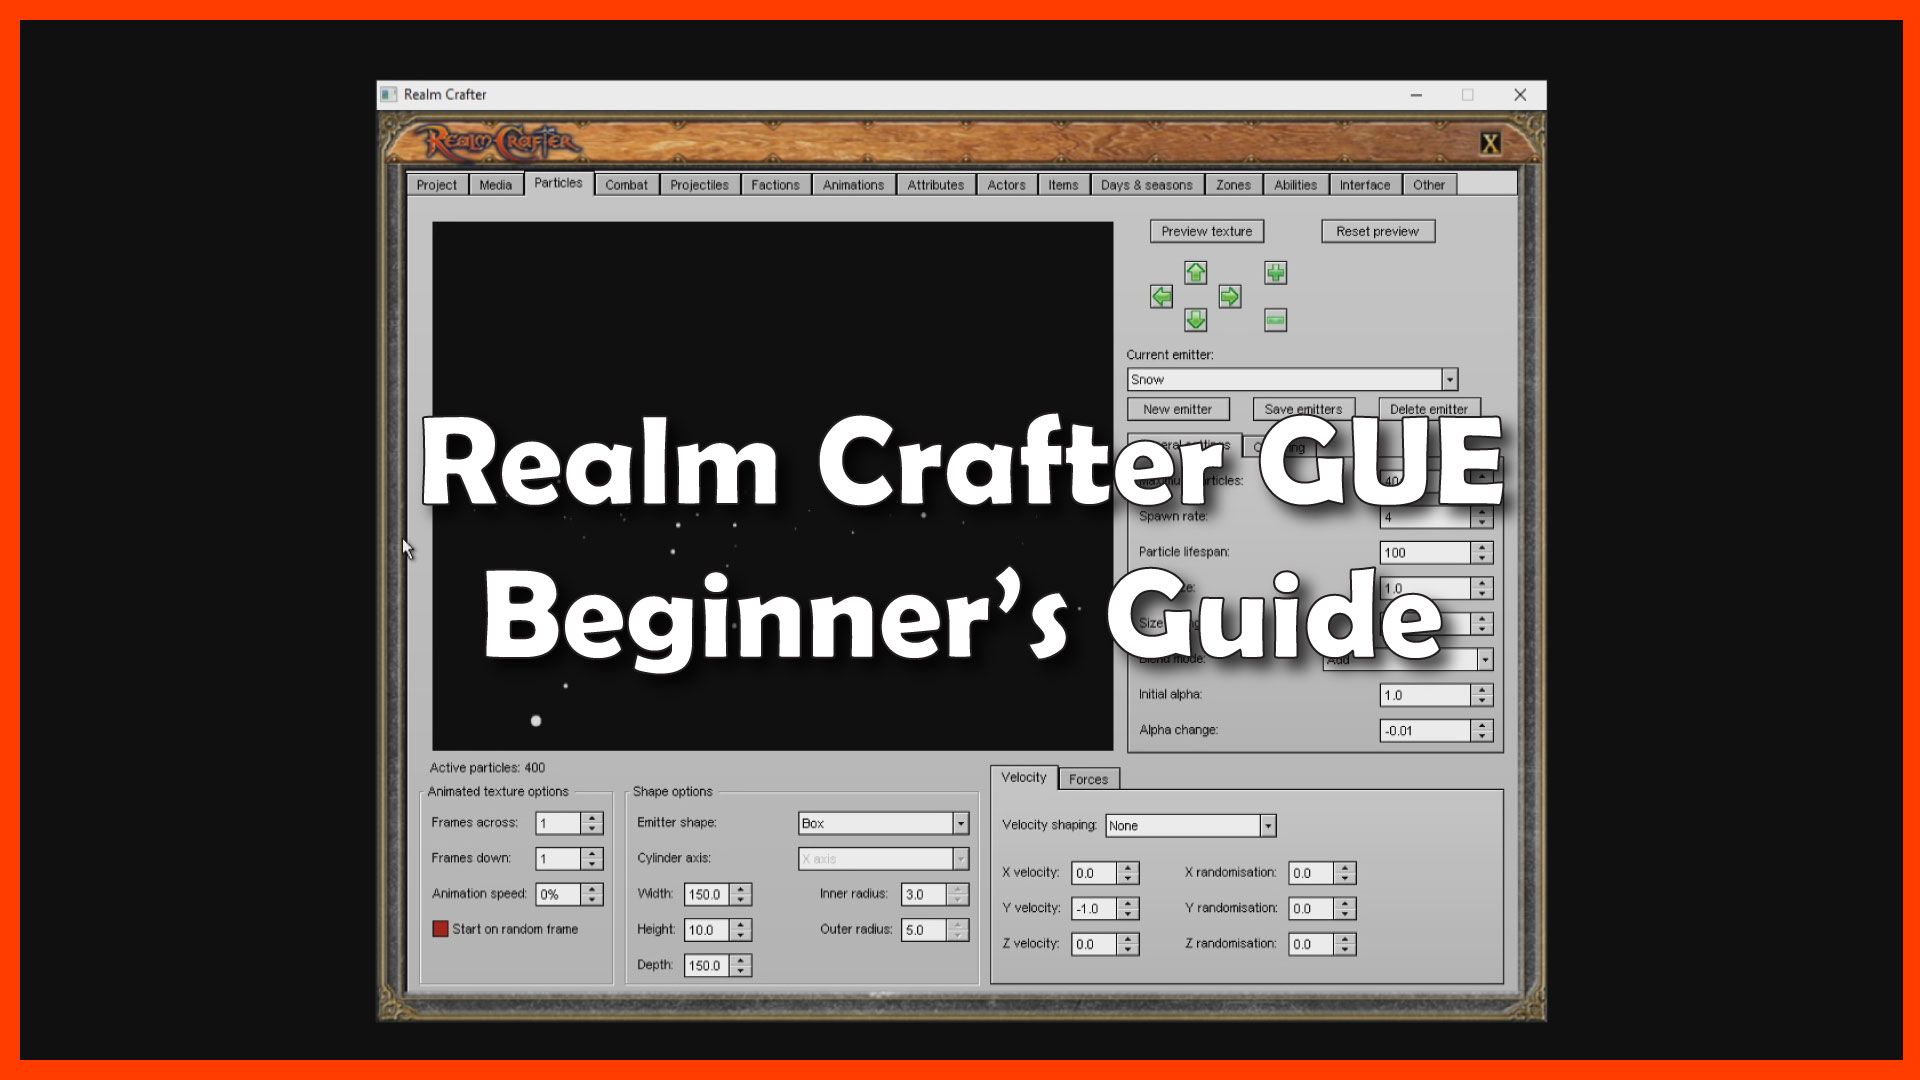 Realm Crafter GUE Beginners Guide: Make Your Own RPG title image